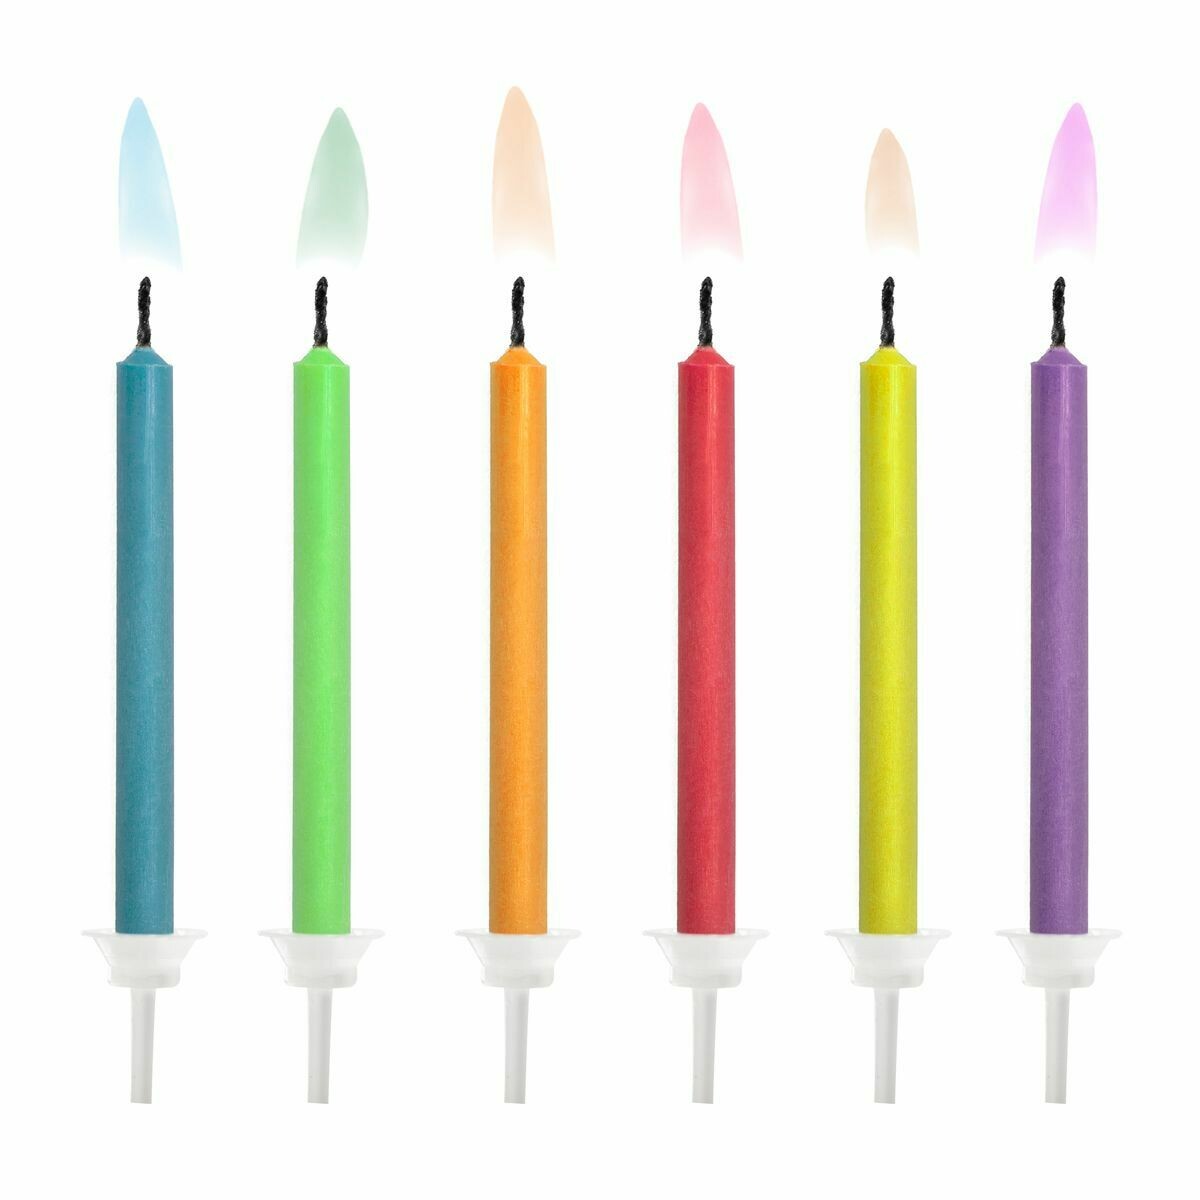 PartyDeco Birthday Candles -COLOURED FLAMES 6 τεμ. - Κεράκια Με χρωματιστή φλόγα